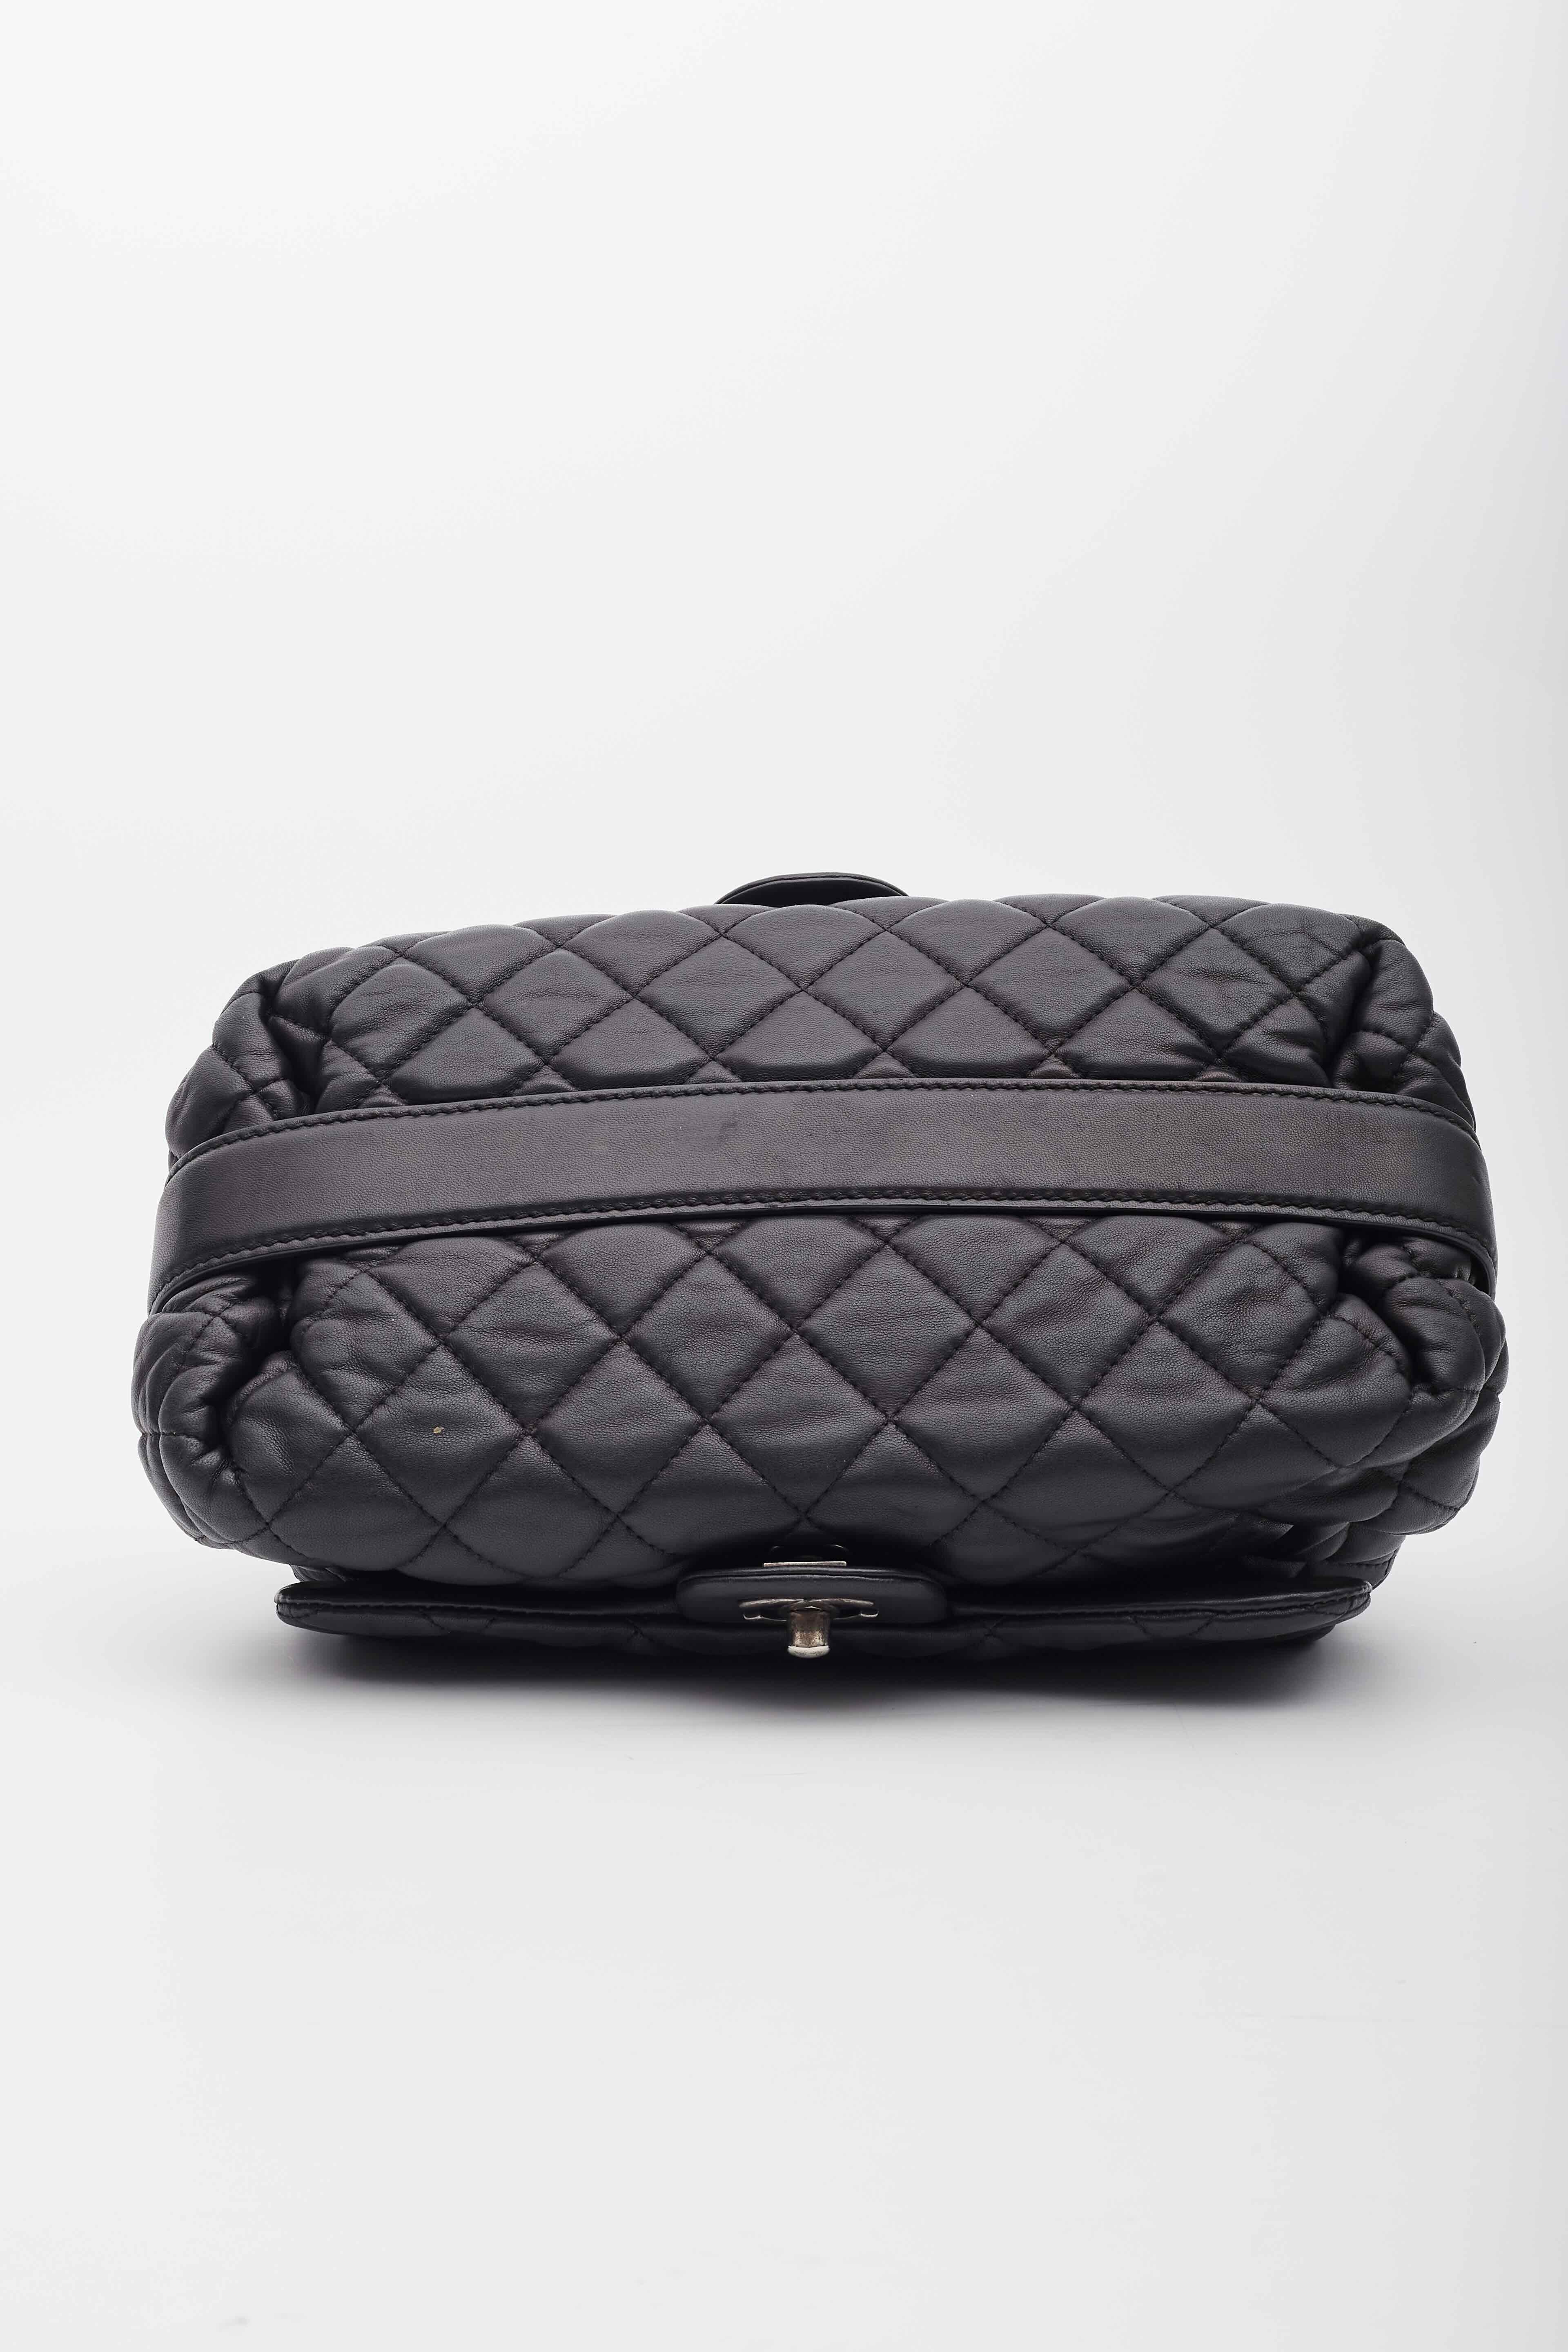 Chanel Black Lambskin Two Way Flap Shoulder Bag In Good Condition For Sale In Montreal, Quebec